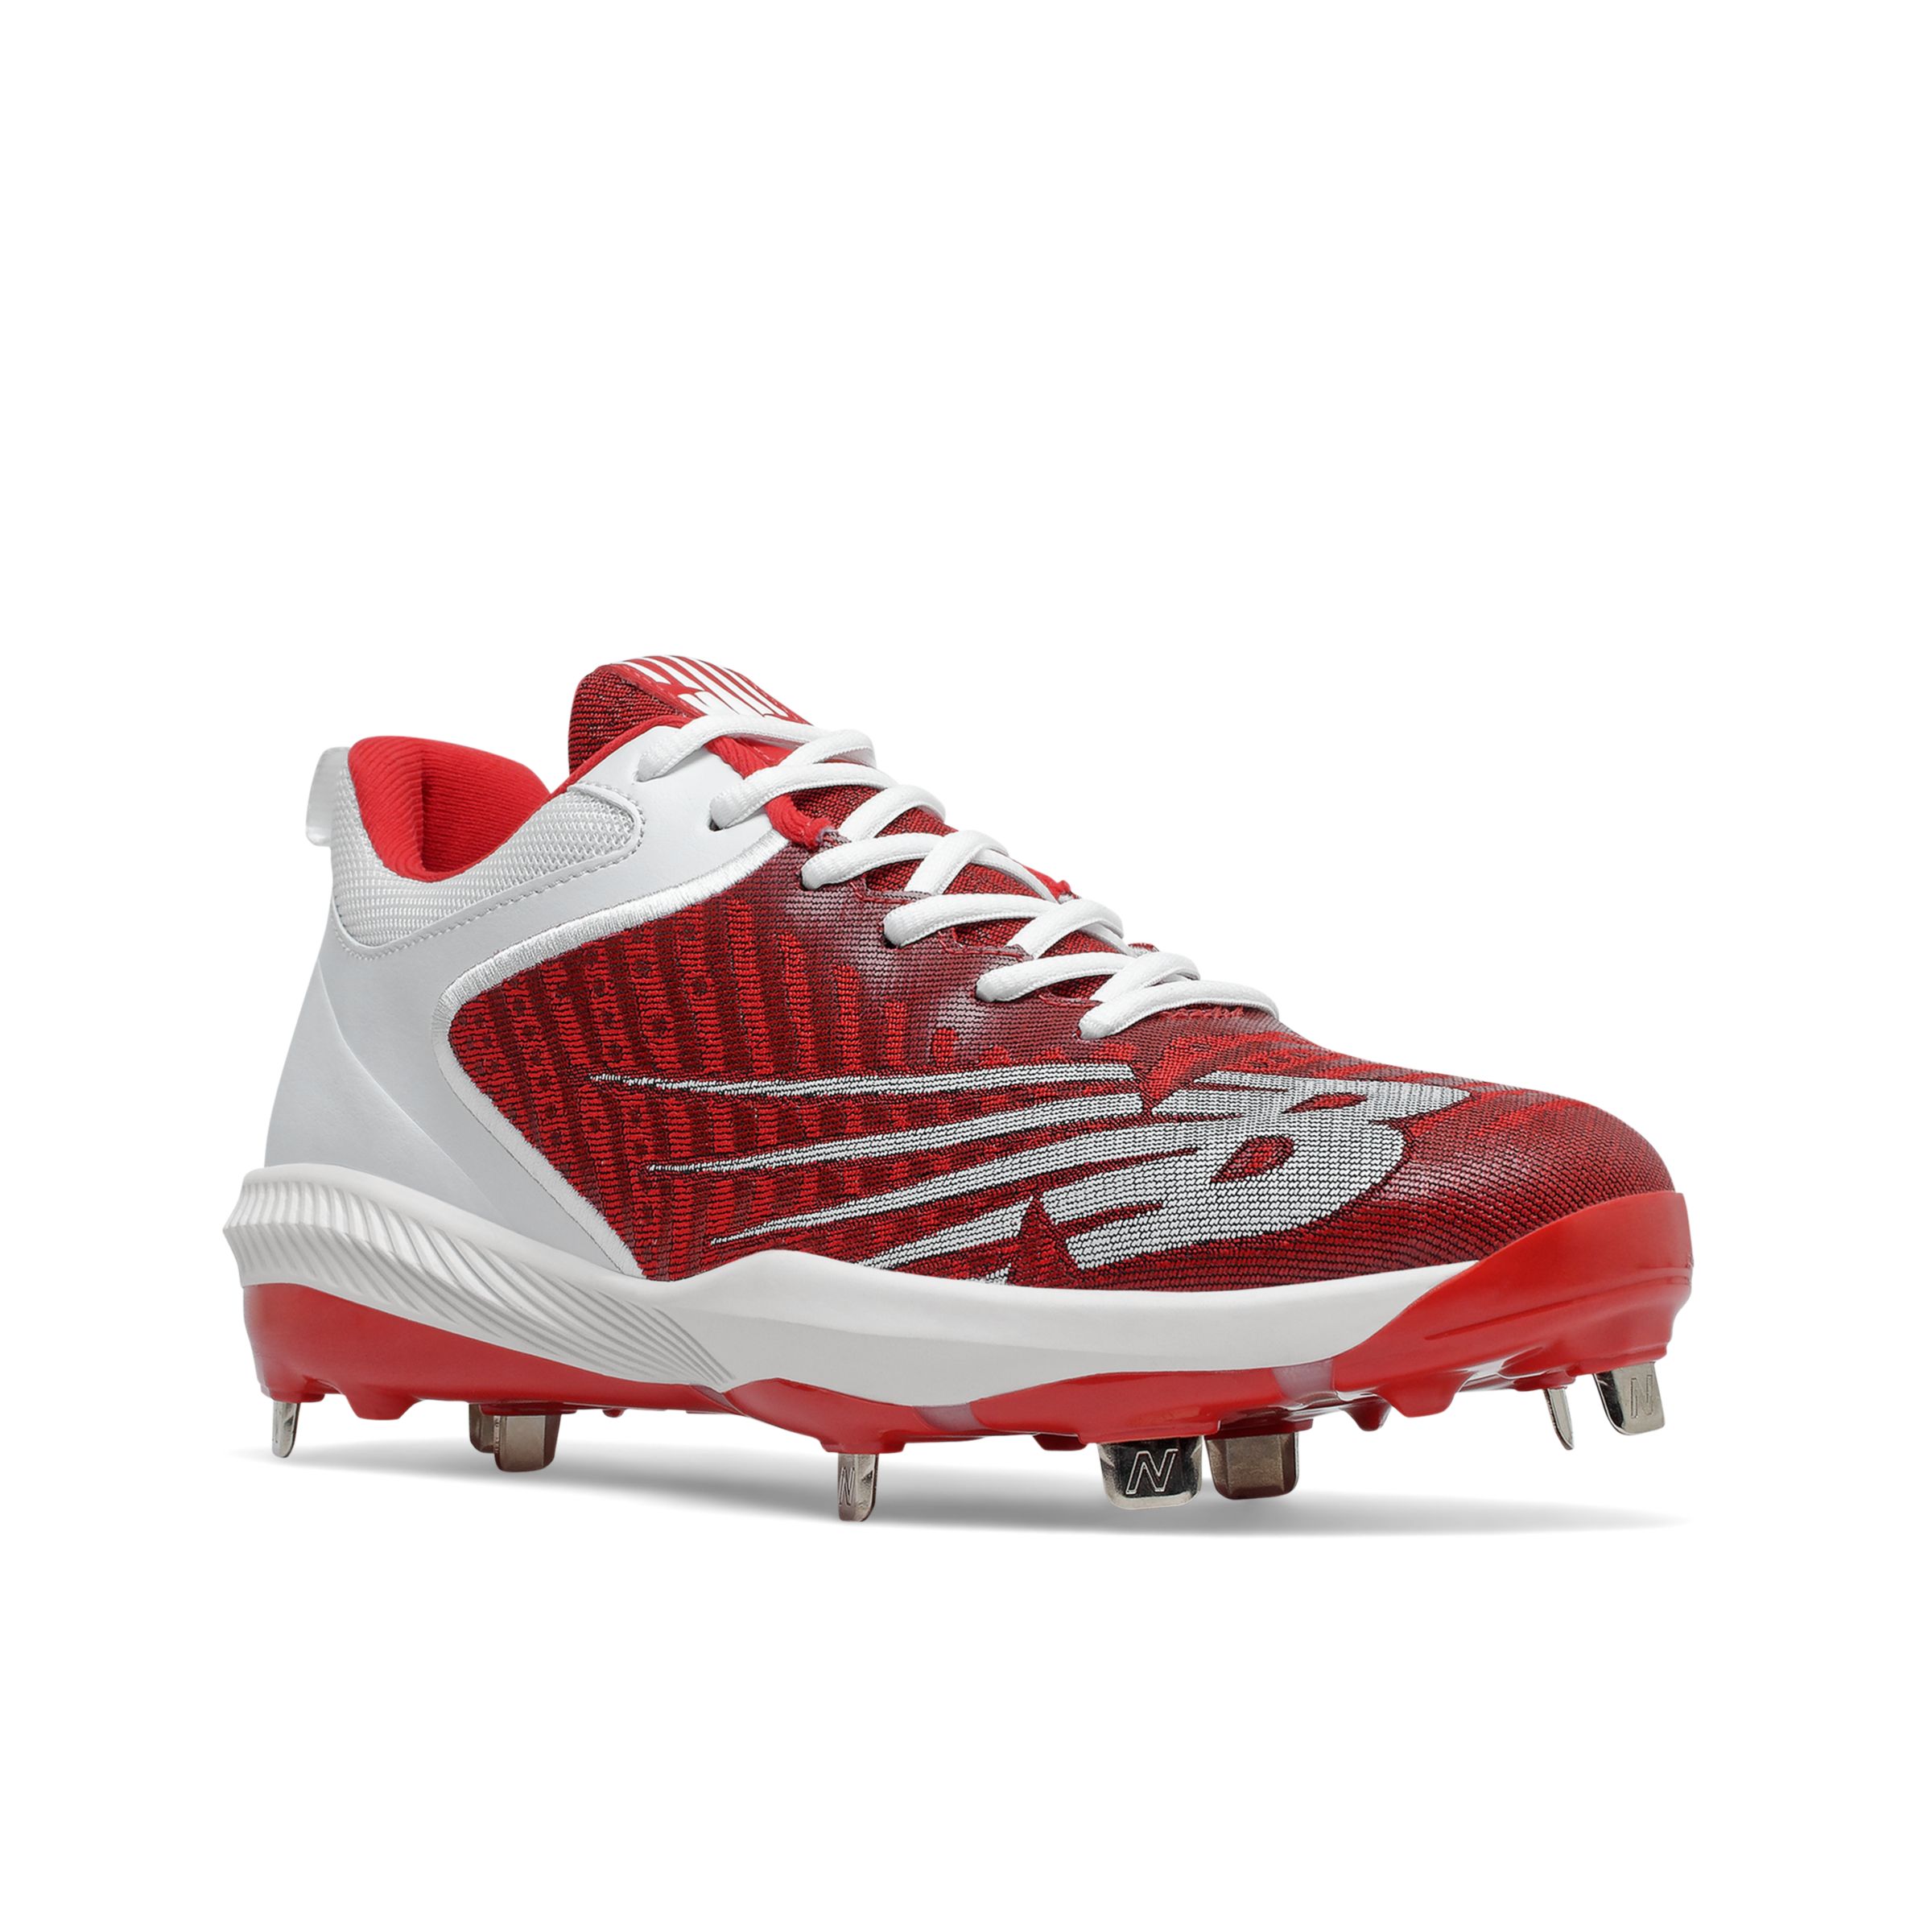 FuelCell 4040 v6 Metal Cleat - Men's 4040 - Baseball, - NB Team Sports - US